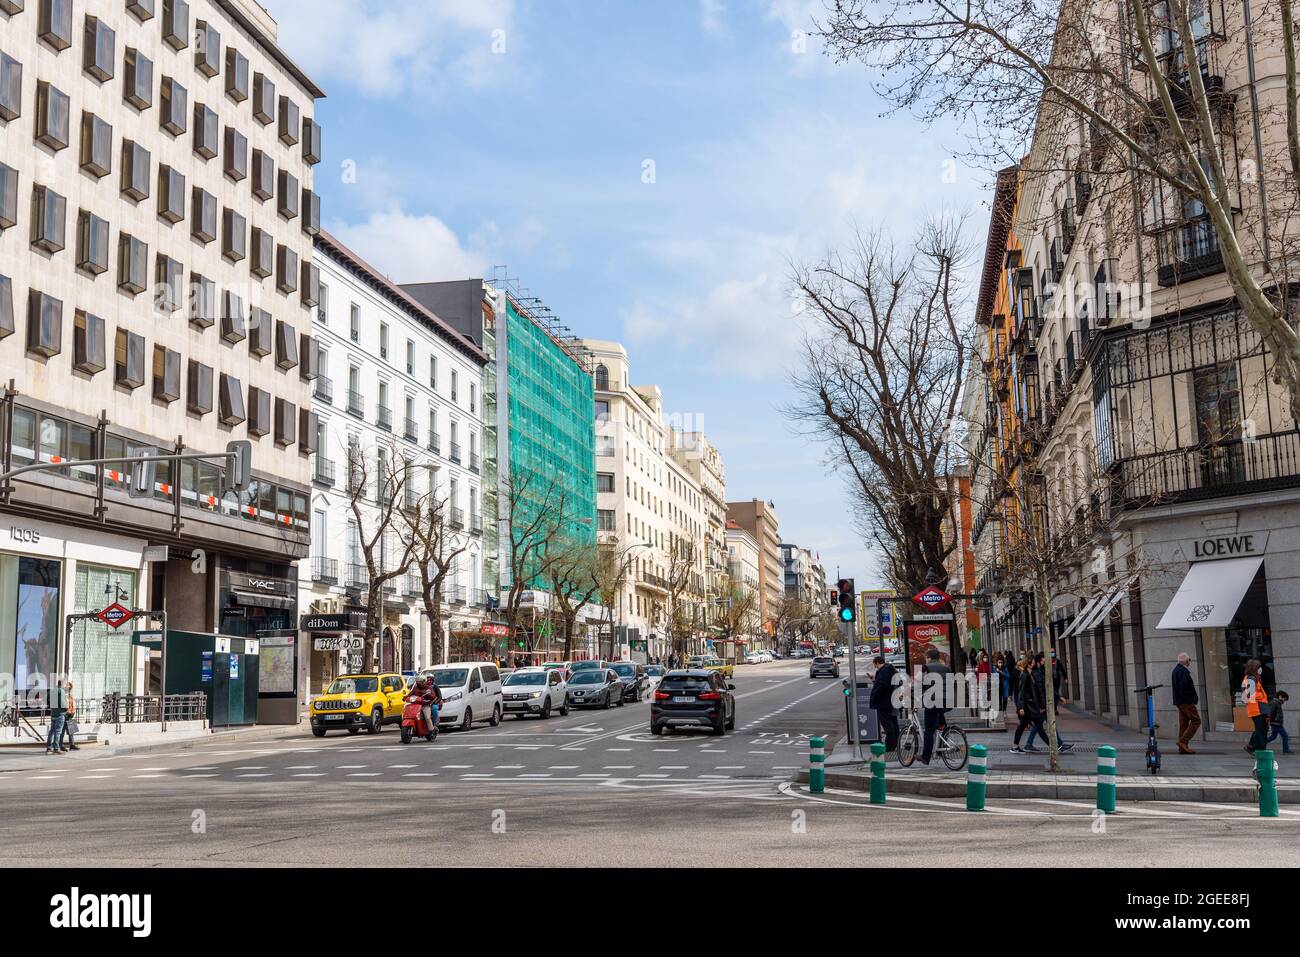 Madrid, Spain - March 7, 2021: Scenic view of Serrano amd Goya Street, a well known shopping area in Salamanca District, one of the wealthiest areas w Stock Photo